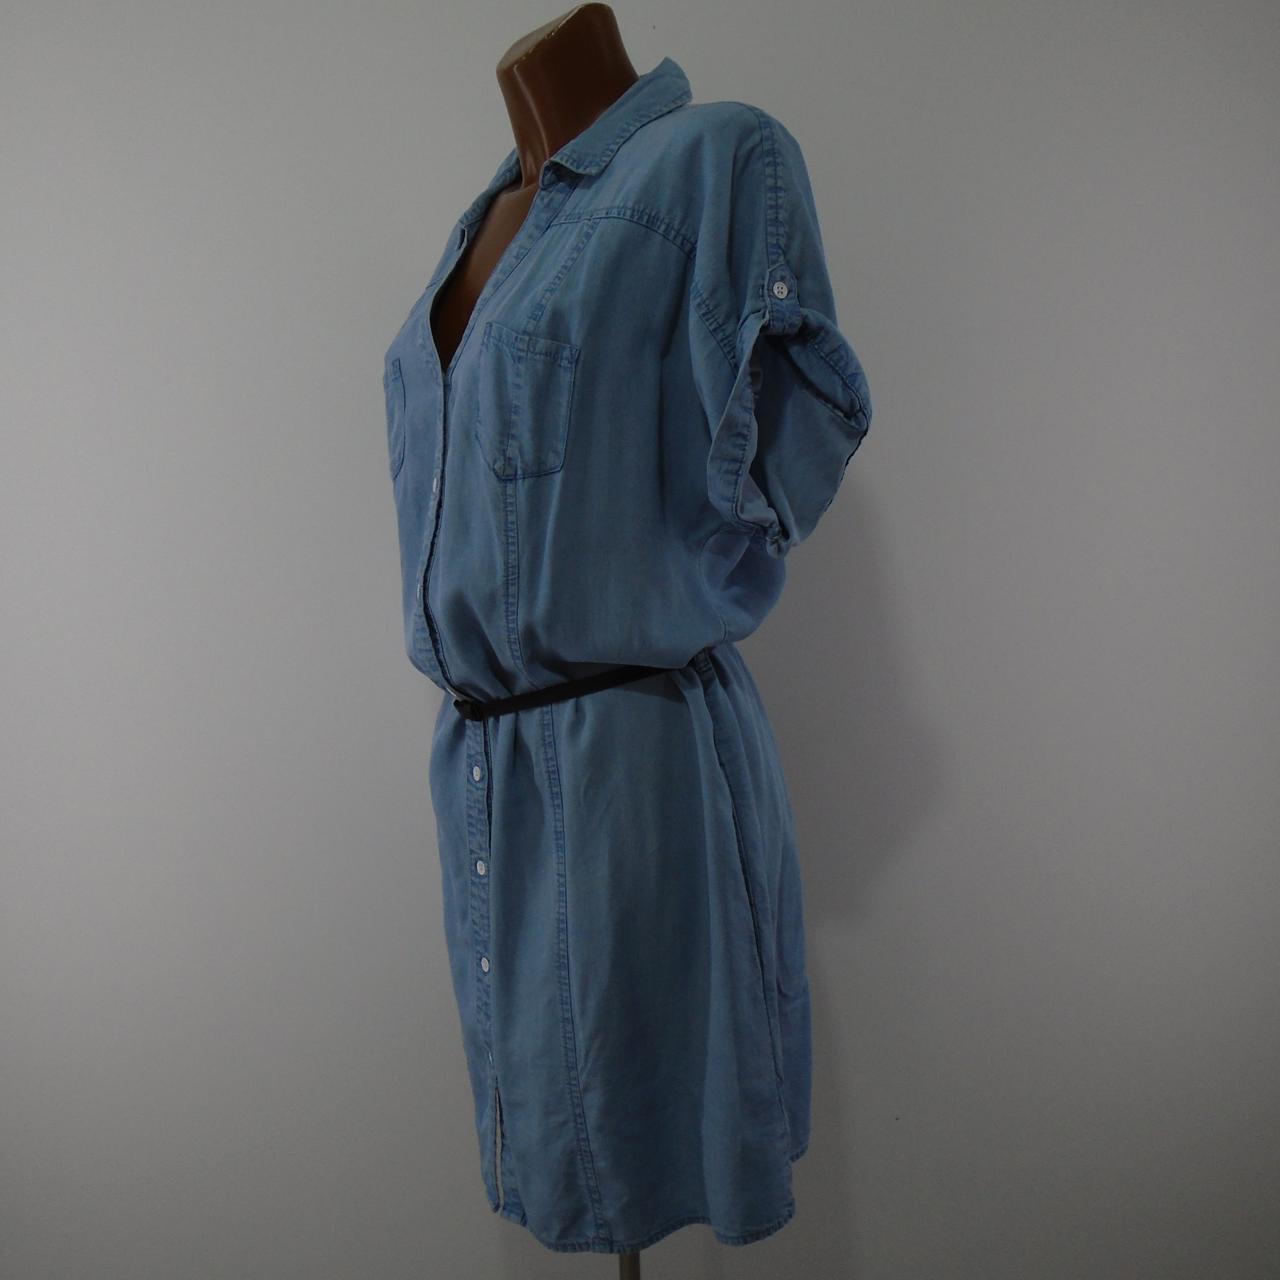 Women's Dress Guees. Blue. XL. Used. Very good